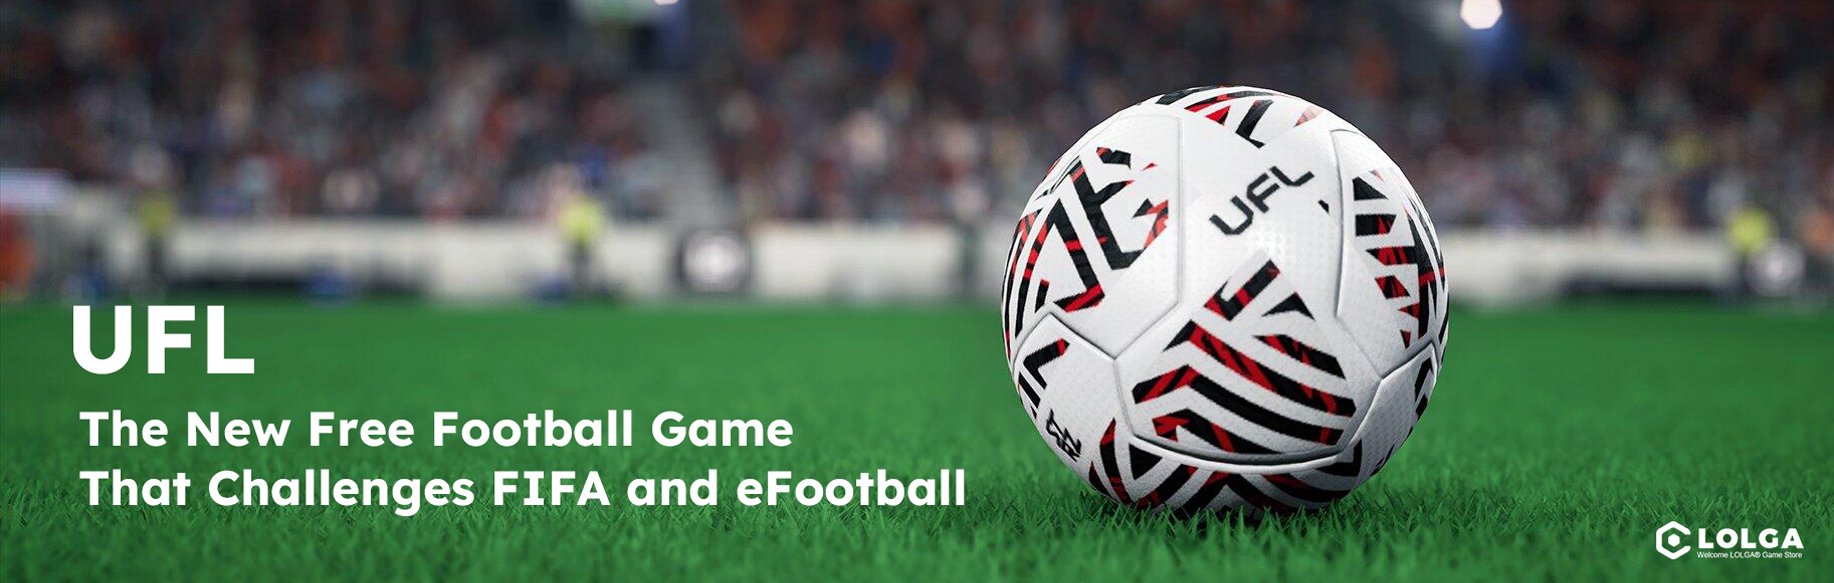 UFL: The New Free Football Game That Challenges FIFA and eFootball